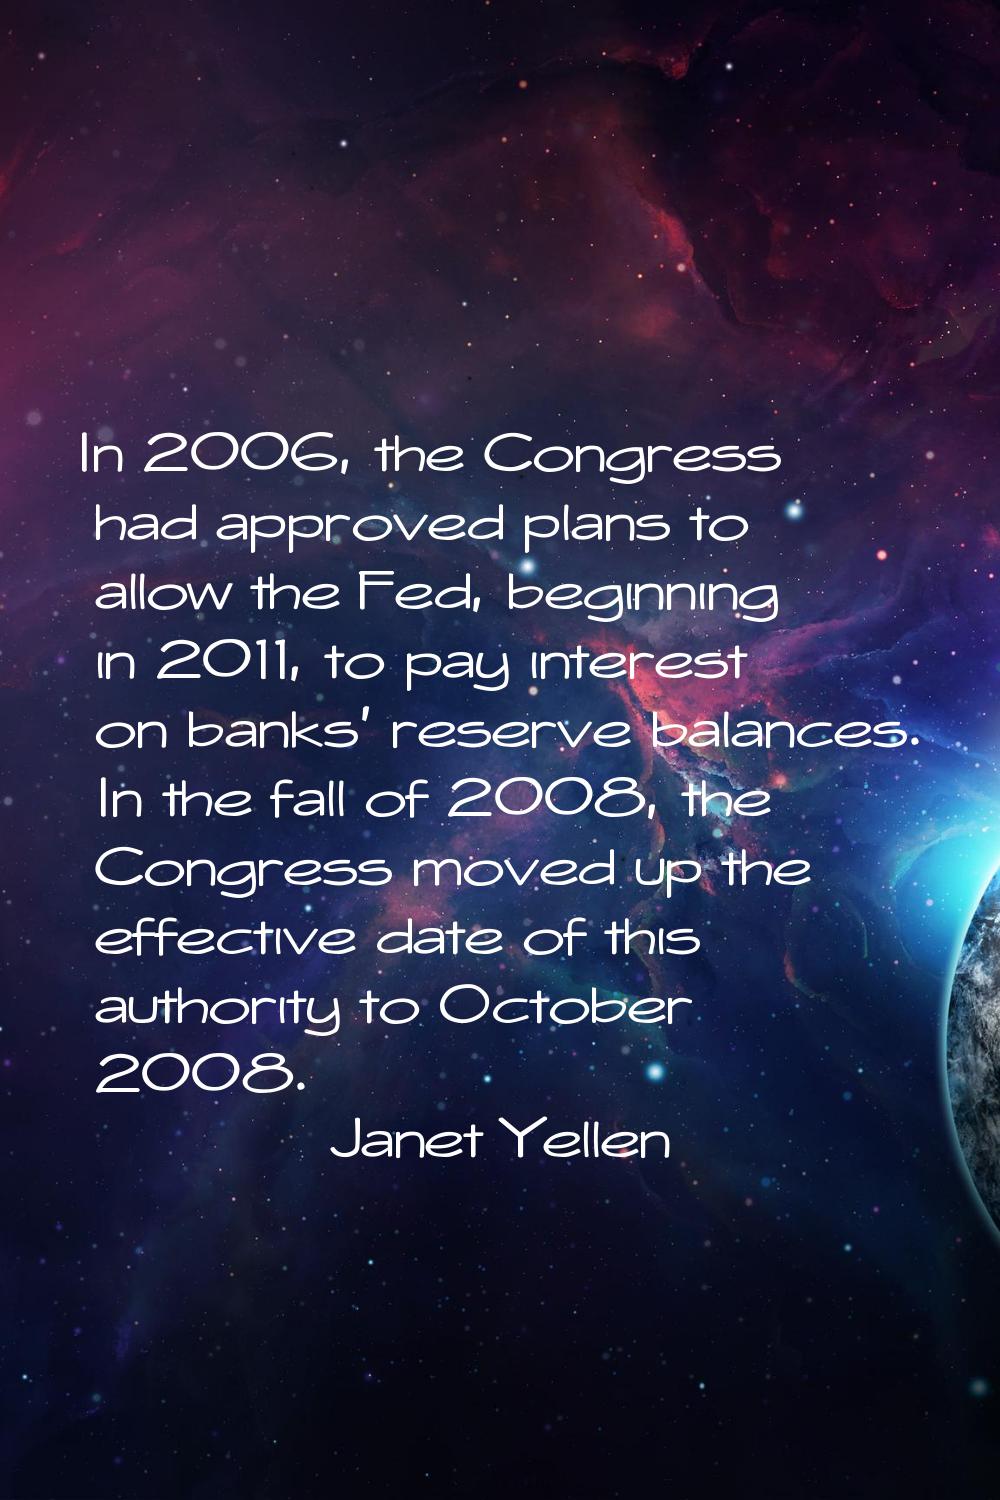 In 2006, the Congress had approved plans to allow the Fed, beginning in 2011, to pay interest on ba